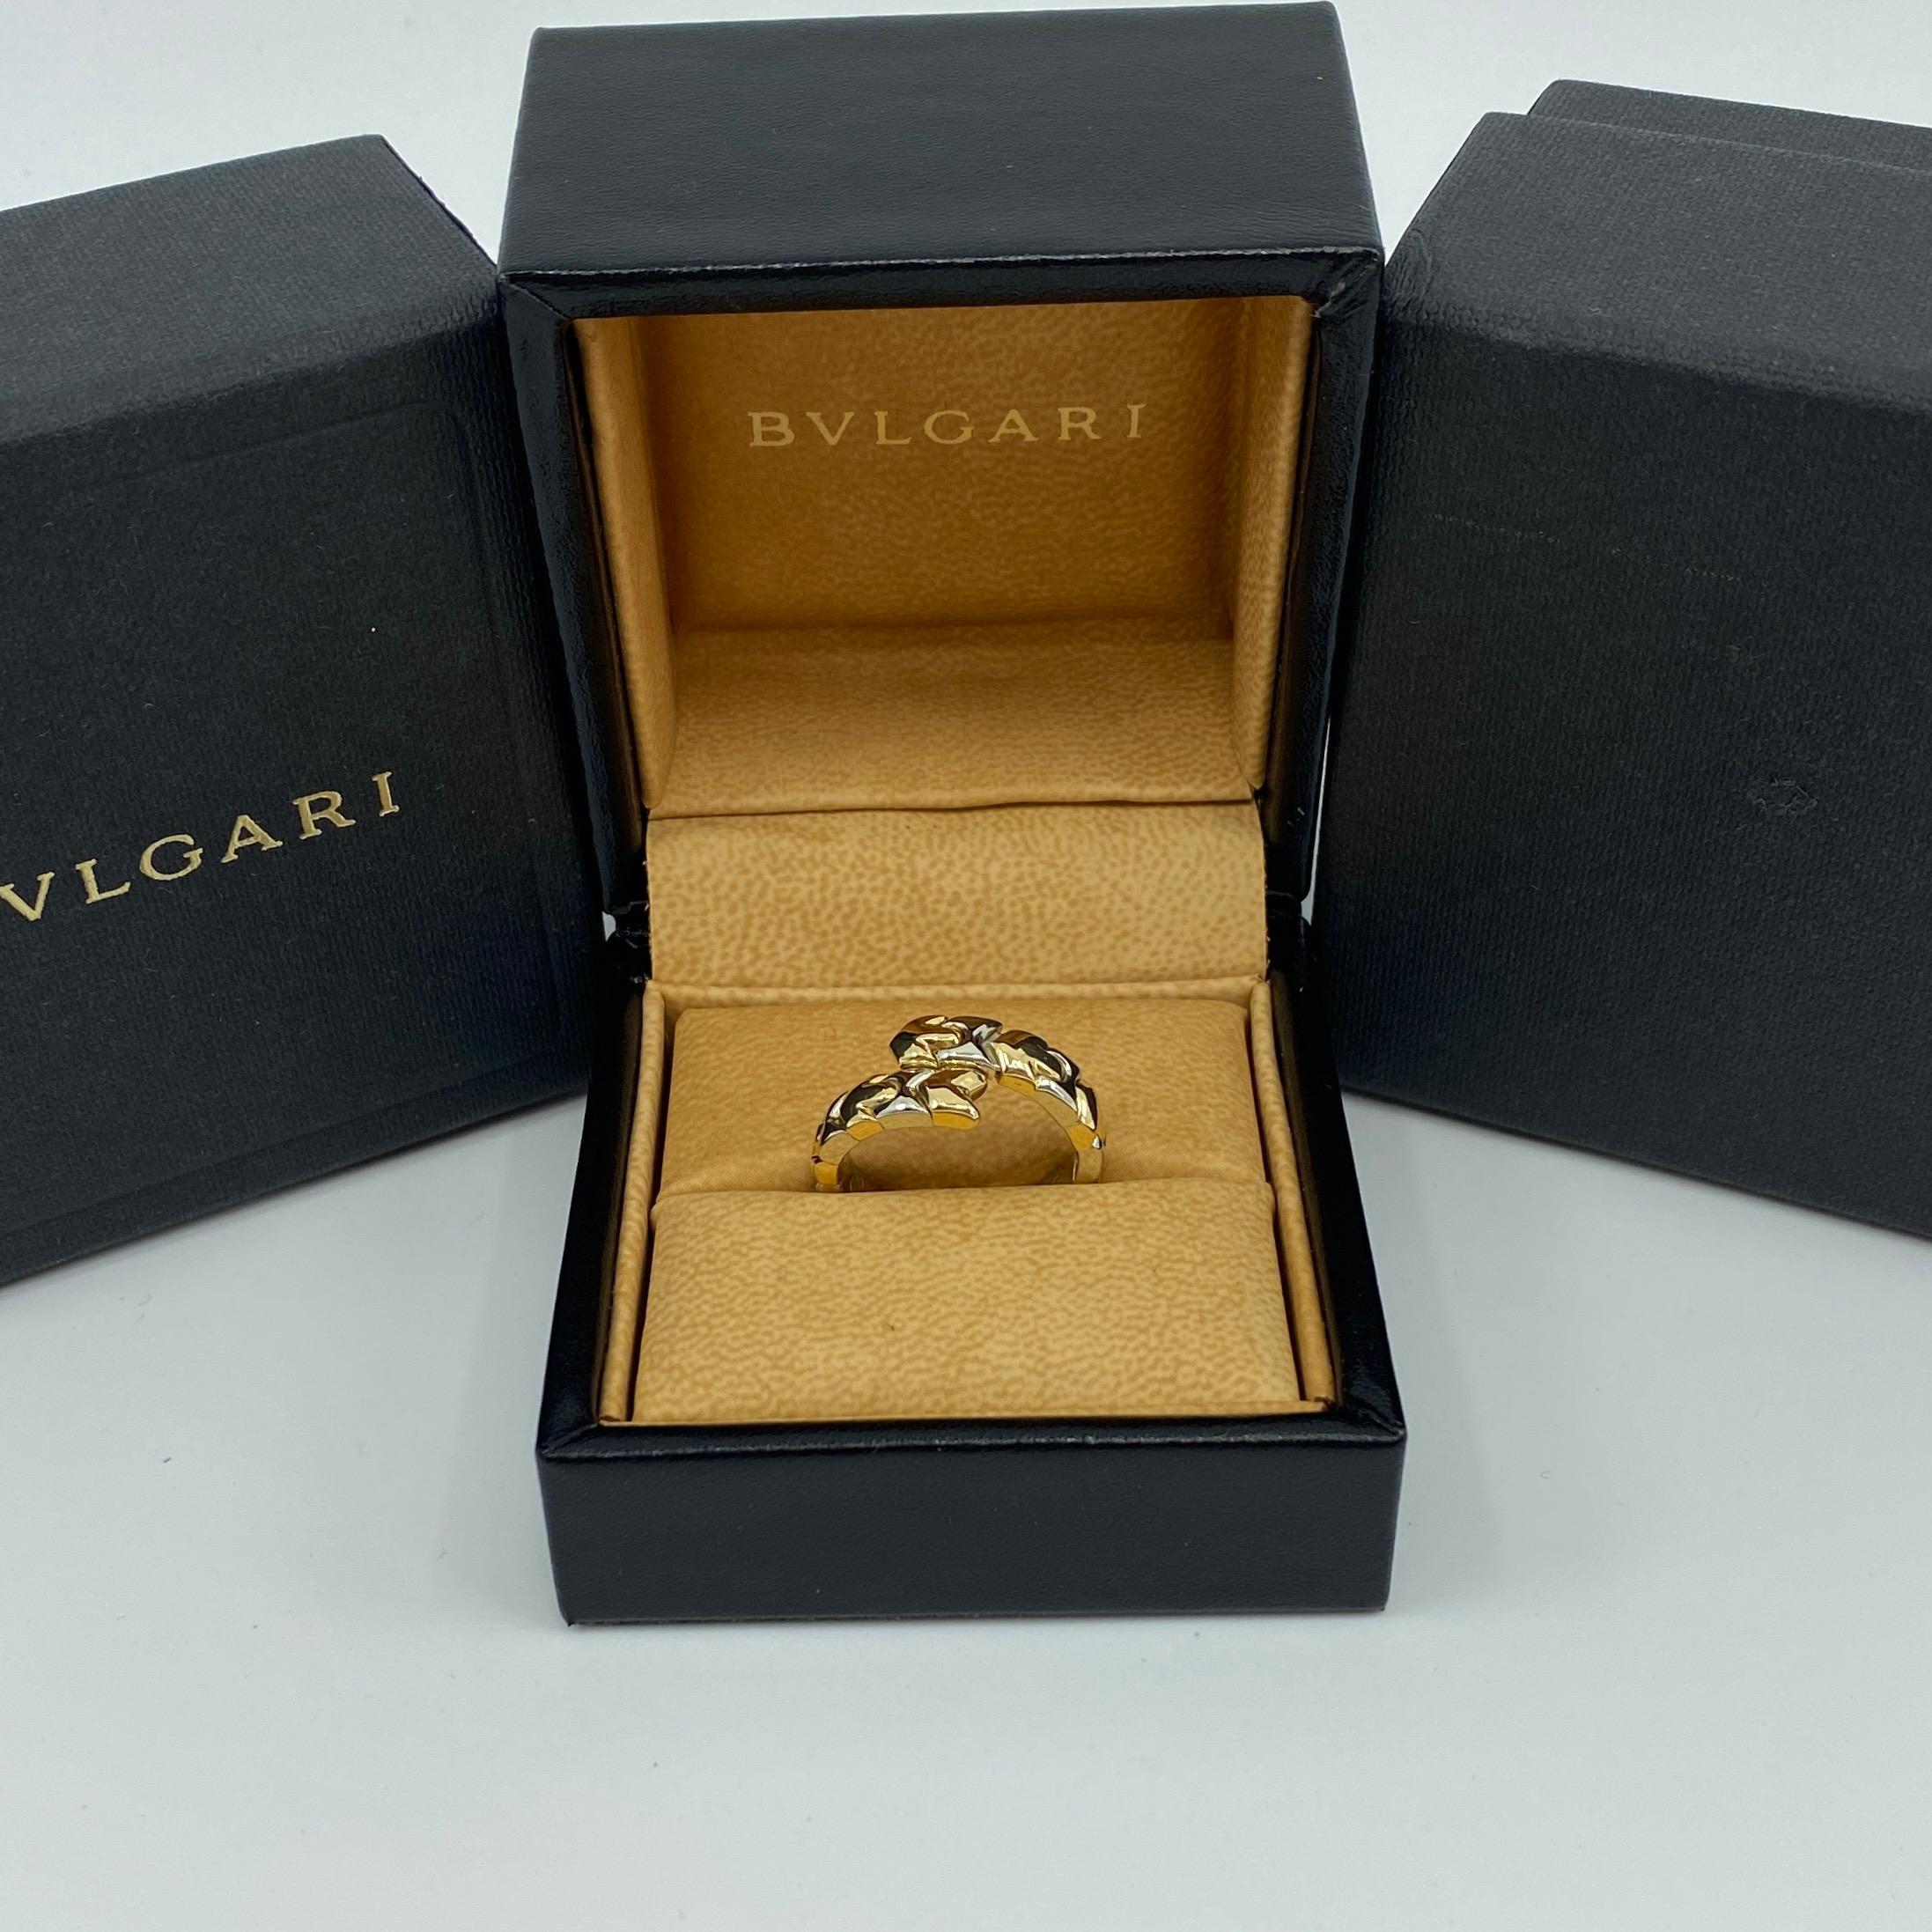 Very Rare Vintage Bvlgari Alveare 18 Karat Gold & Steel Spring Snake Ring.

A beautiful vintage 18k yellow gold and stainless steel Bvlgari Alveare ring with flexible spring design.

This stylish and unique spring design allowing it to fit between